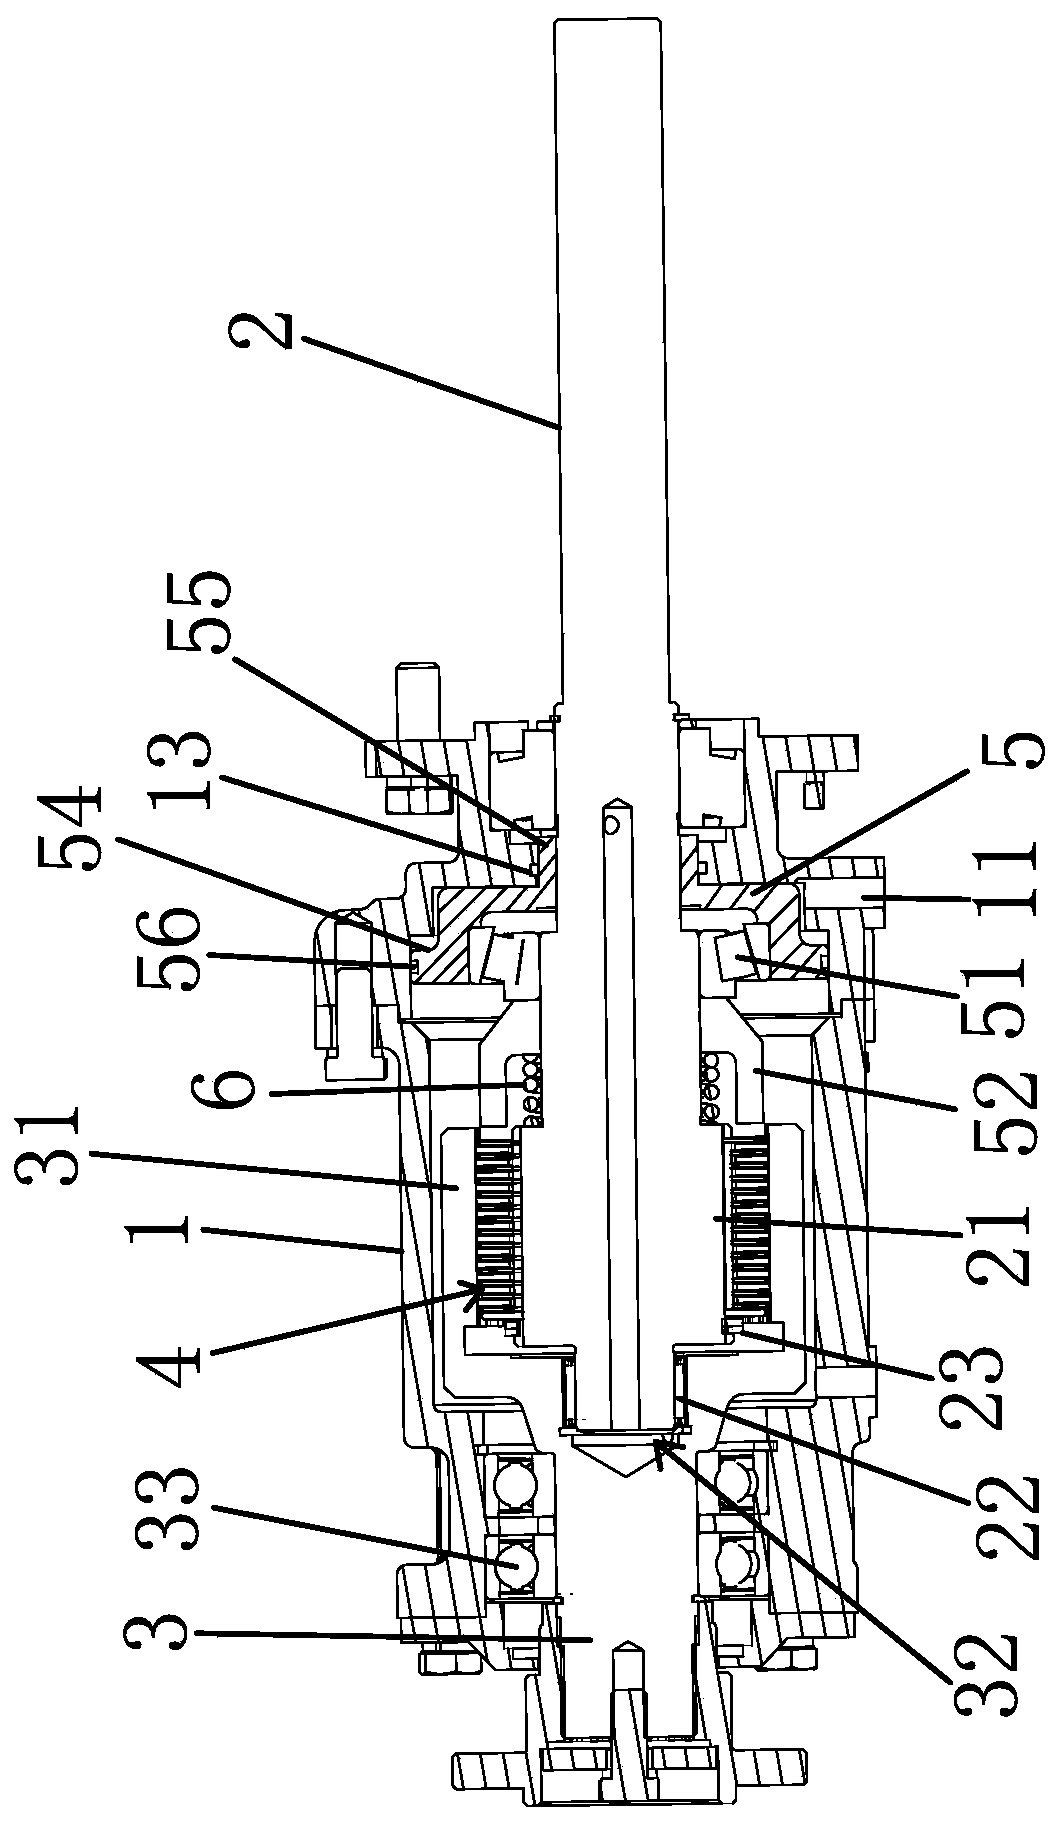 Direct-connected multi-piece friction power take-off